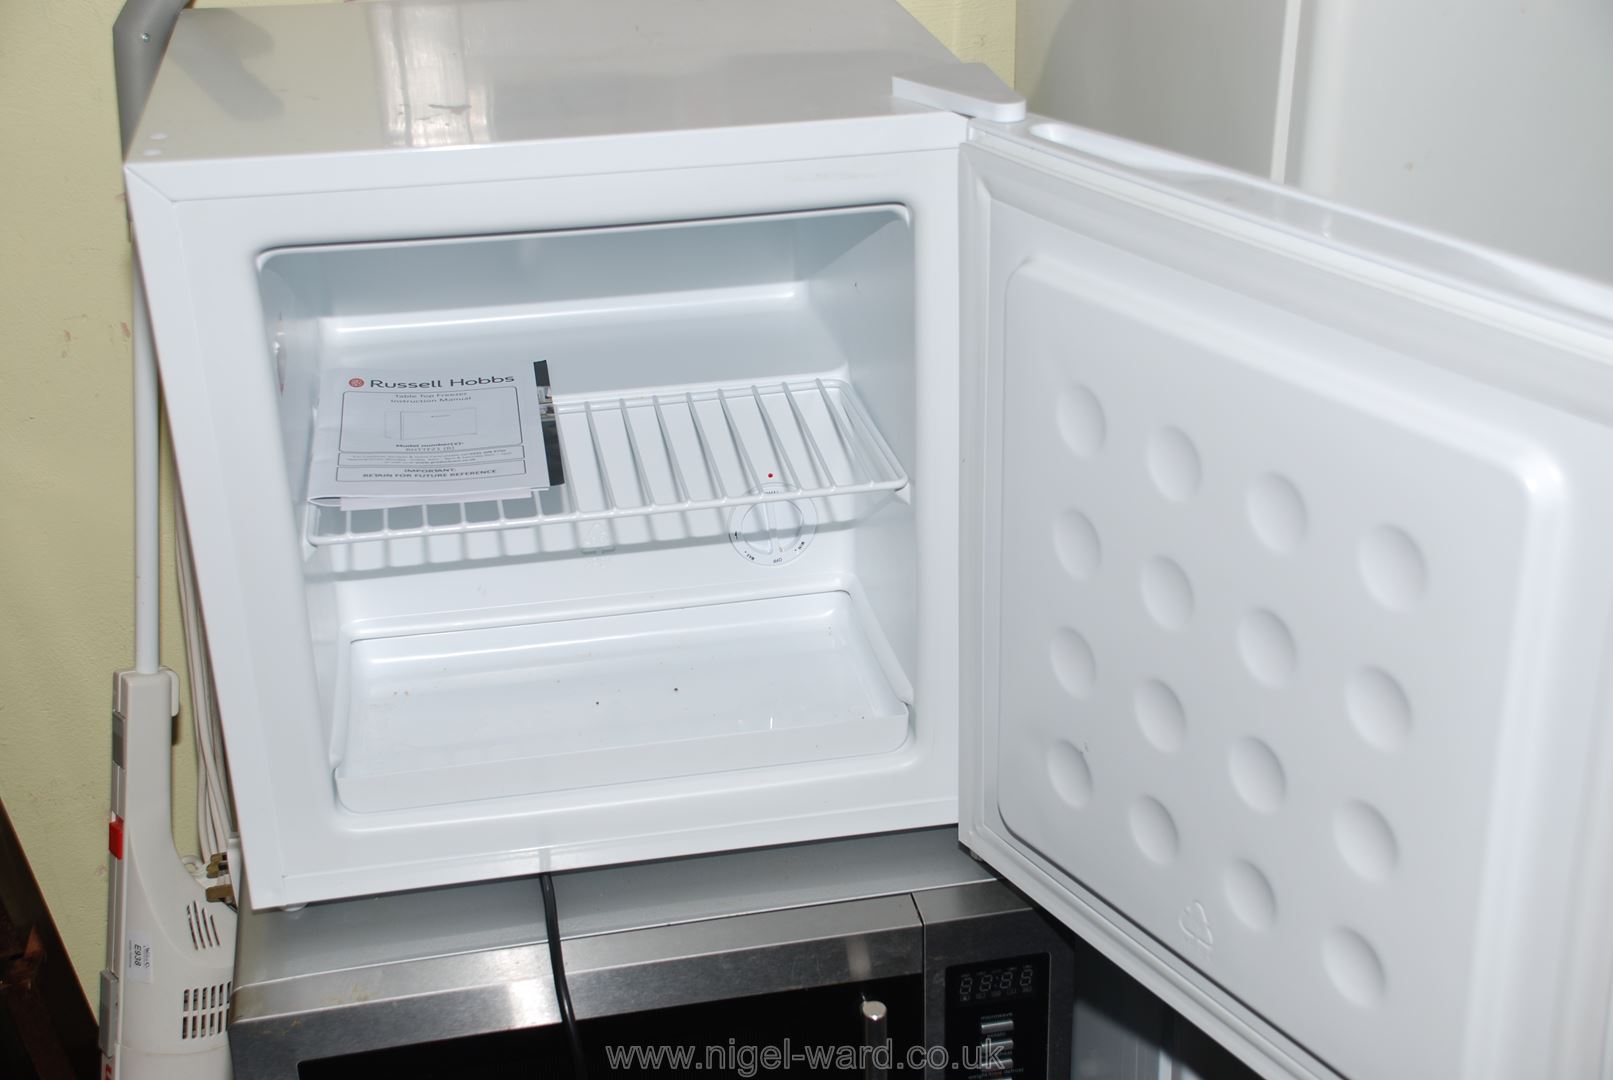 A "Russell Hobbs" counter-top 'fridge. - Image 2 of 2